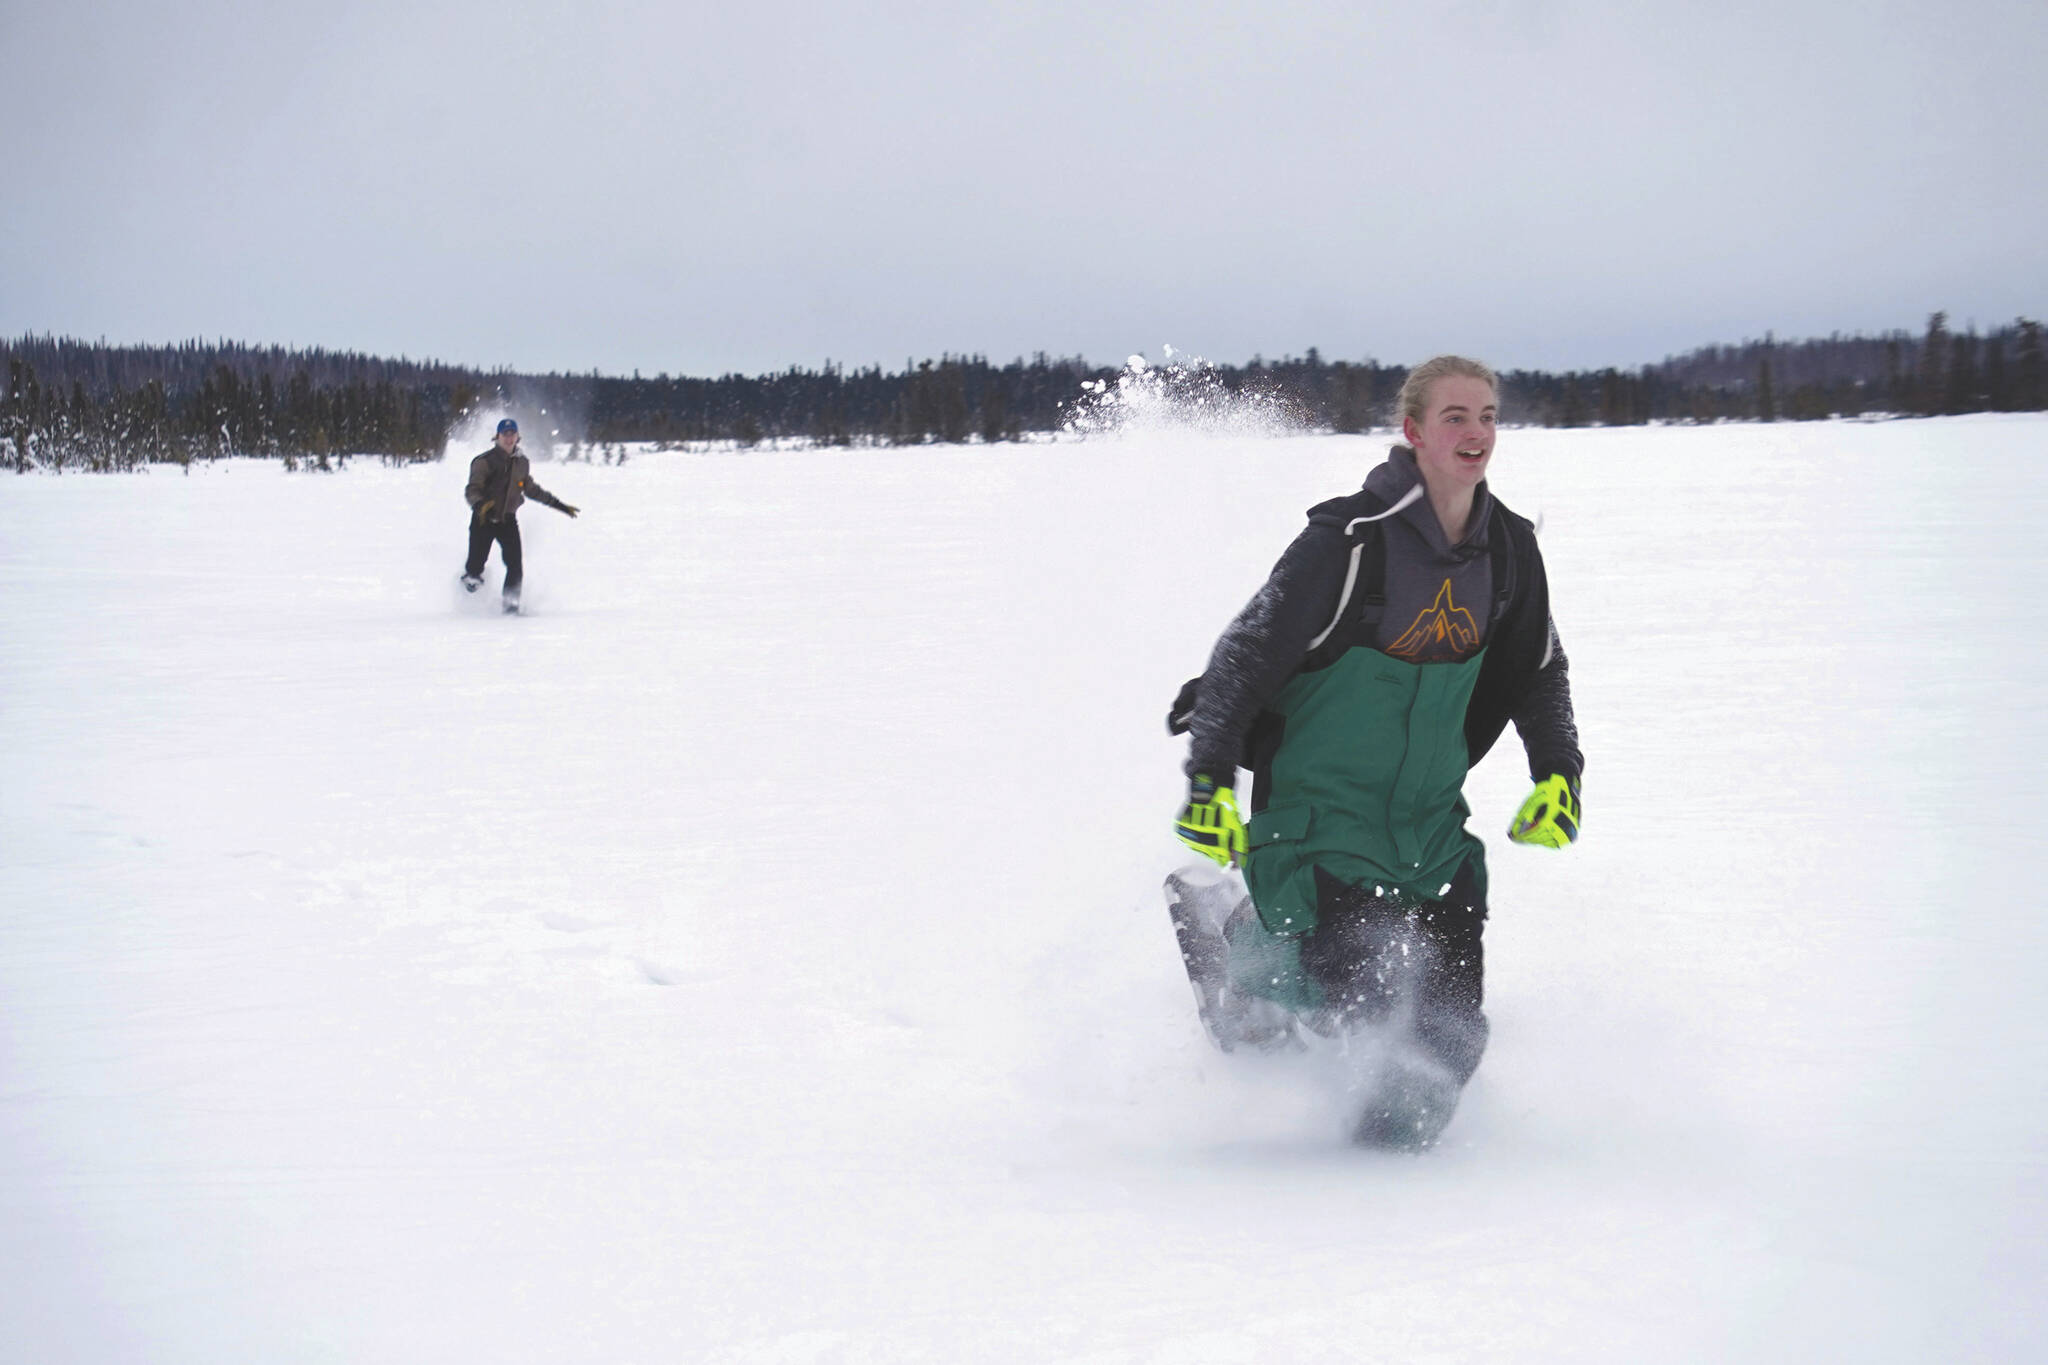 Jake Dye/Peninsula Clarion
Nathan Teates uses snowshoes to run across Headquarters Lake in the Kenai National Wildlife Refuge, pursued by Isaac Copple, near Soldotna on Saturday.